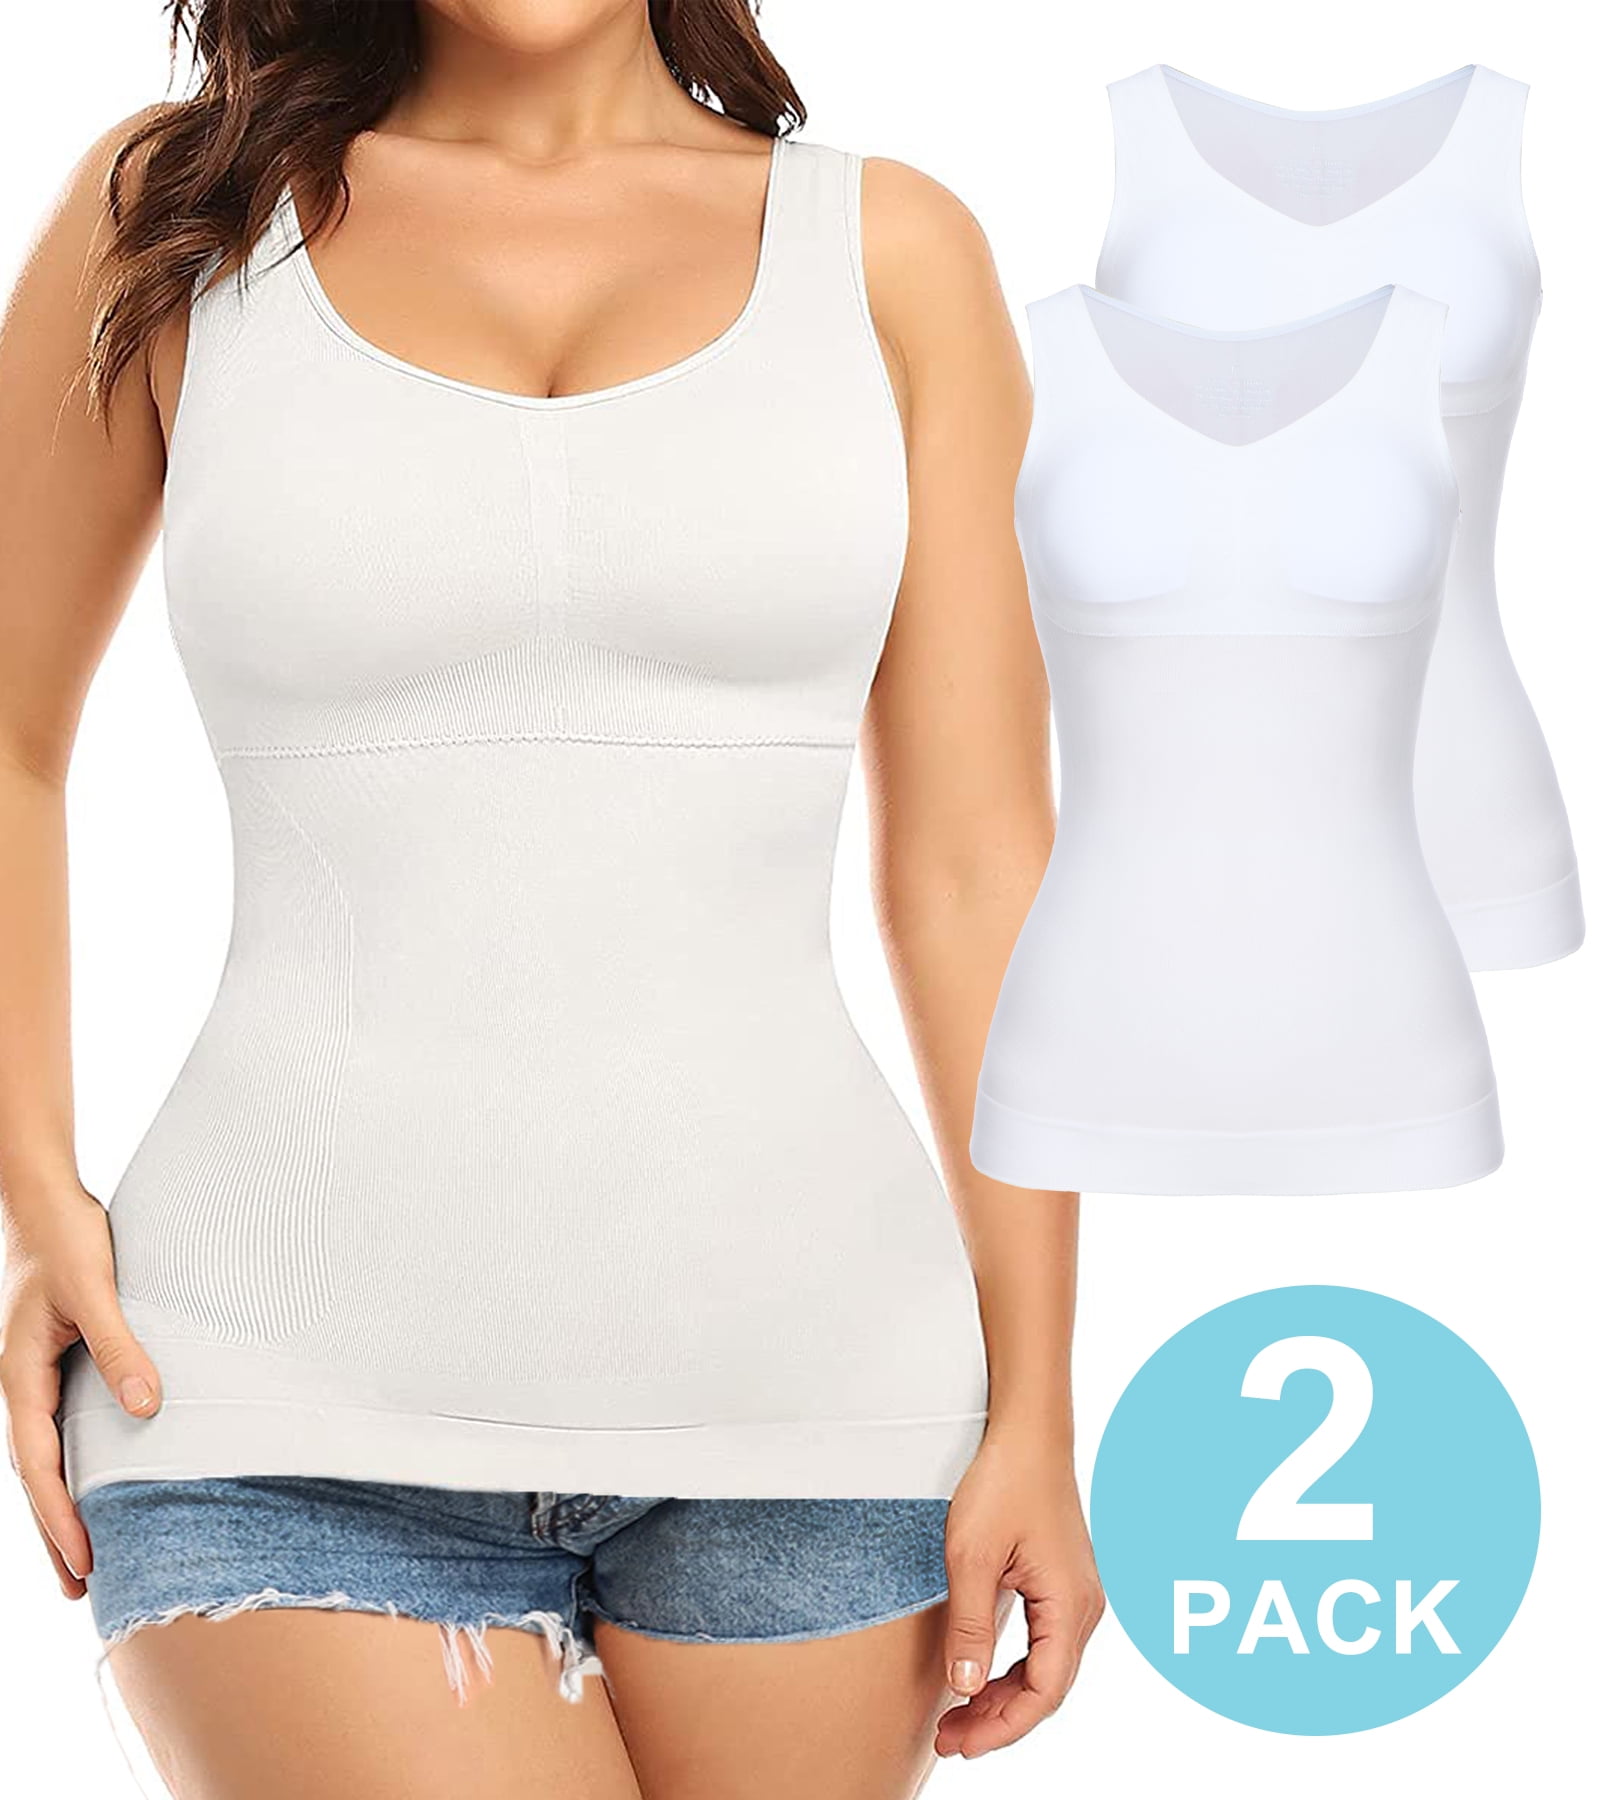 Women's Cami Shaper With Built In Bra Tummy Control Camisole Tank